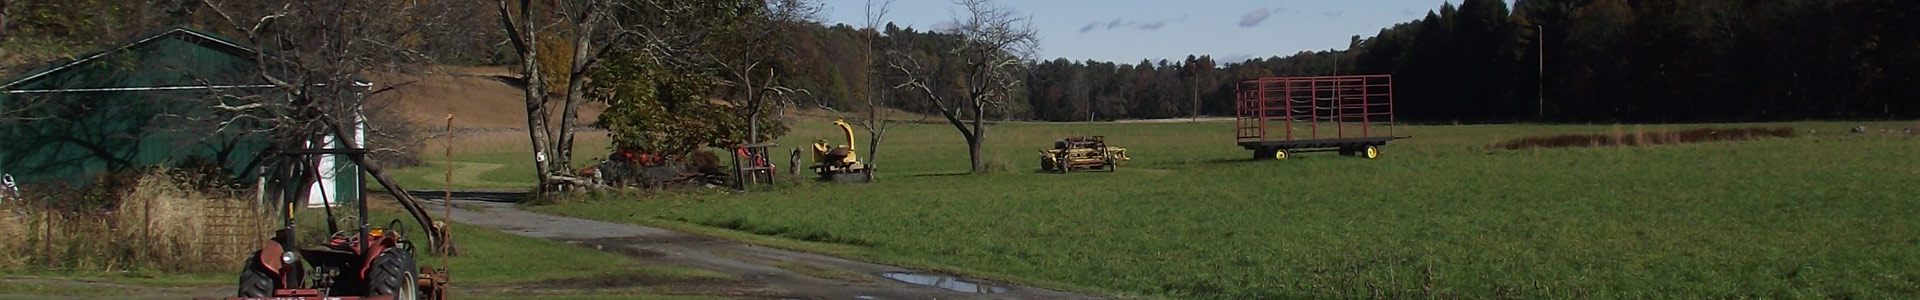 Agriculture equipment in a field surrounded by forest